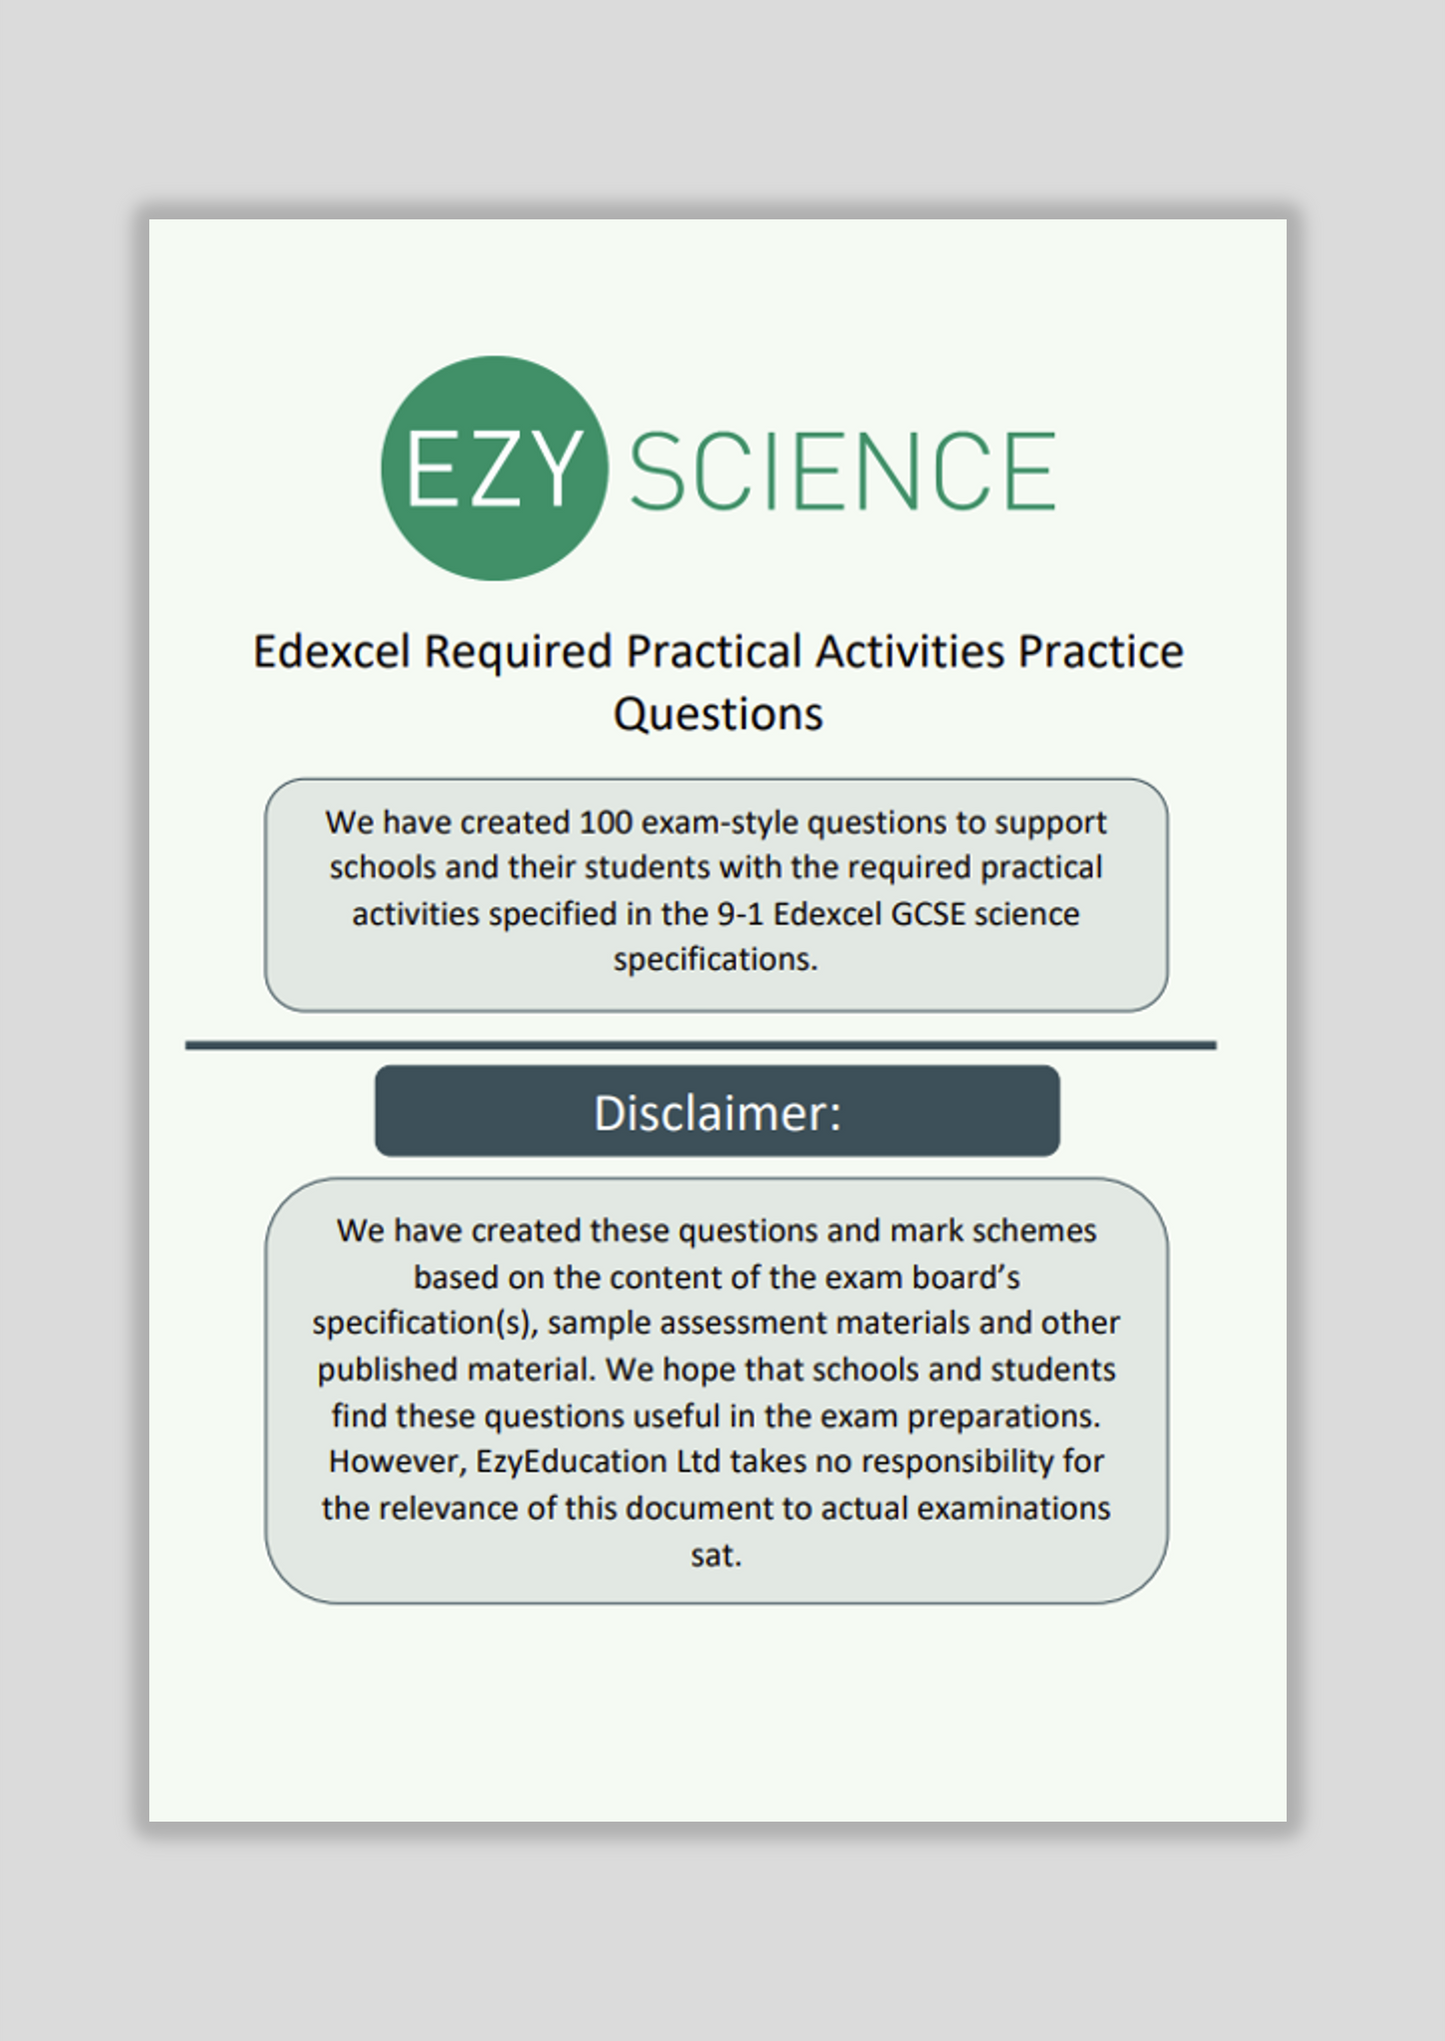 Edexcel Required Practical Questions and Answers Pack - EzyScience